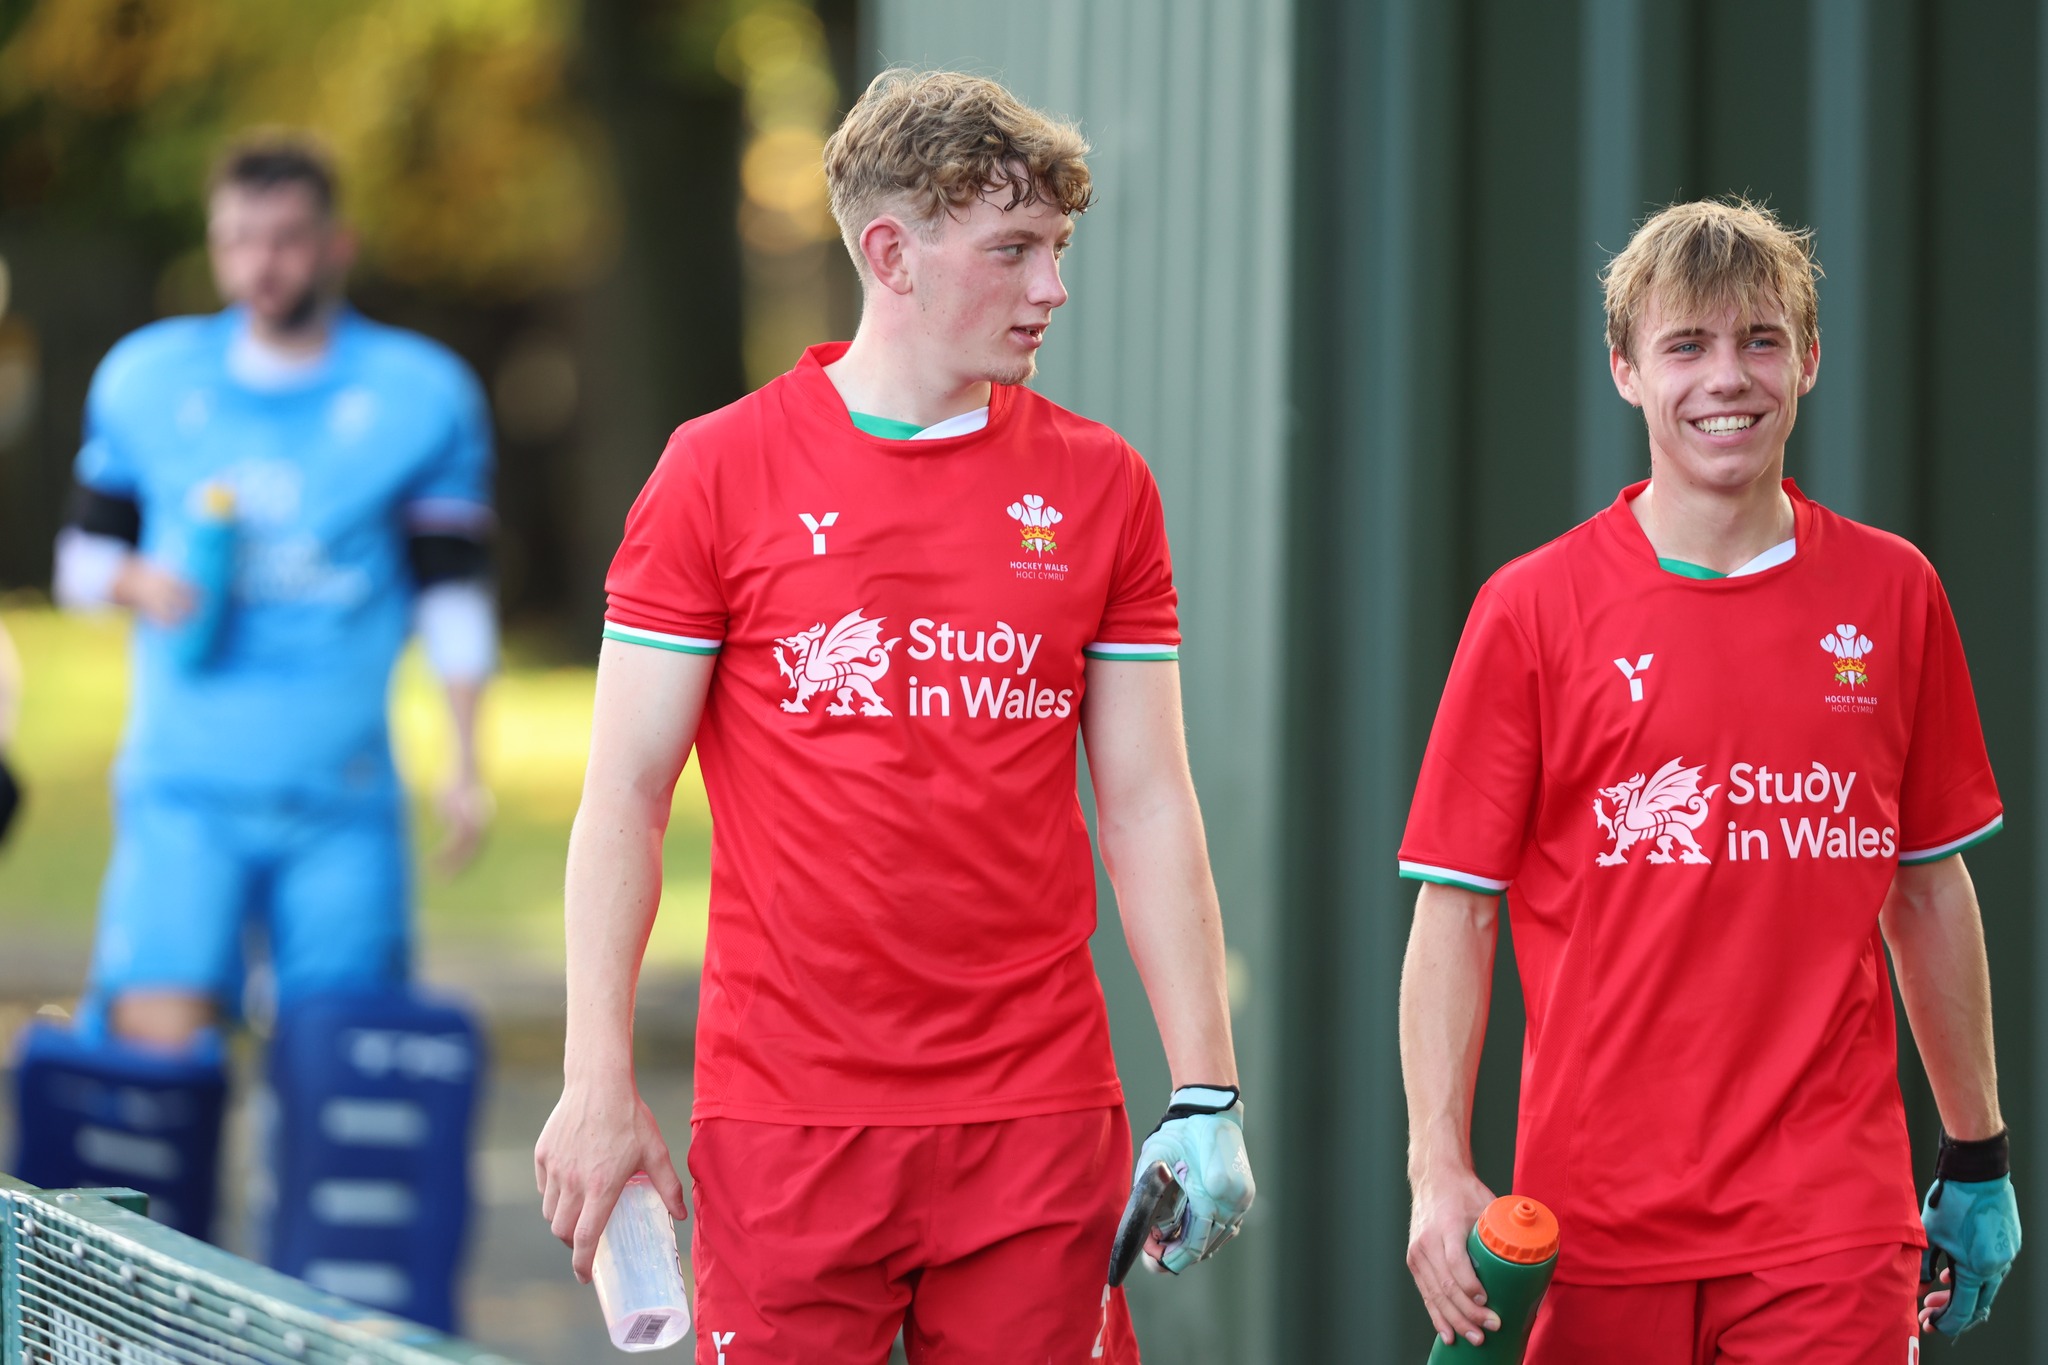 Two Hockey Wales players wearing the shirt featuring the Study in Wales logo